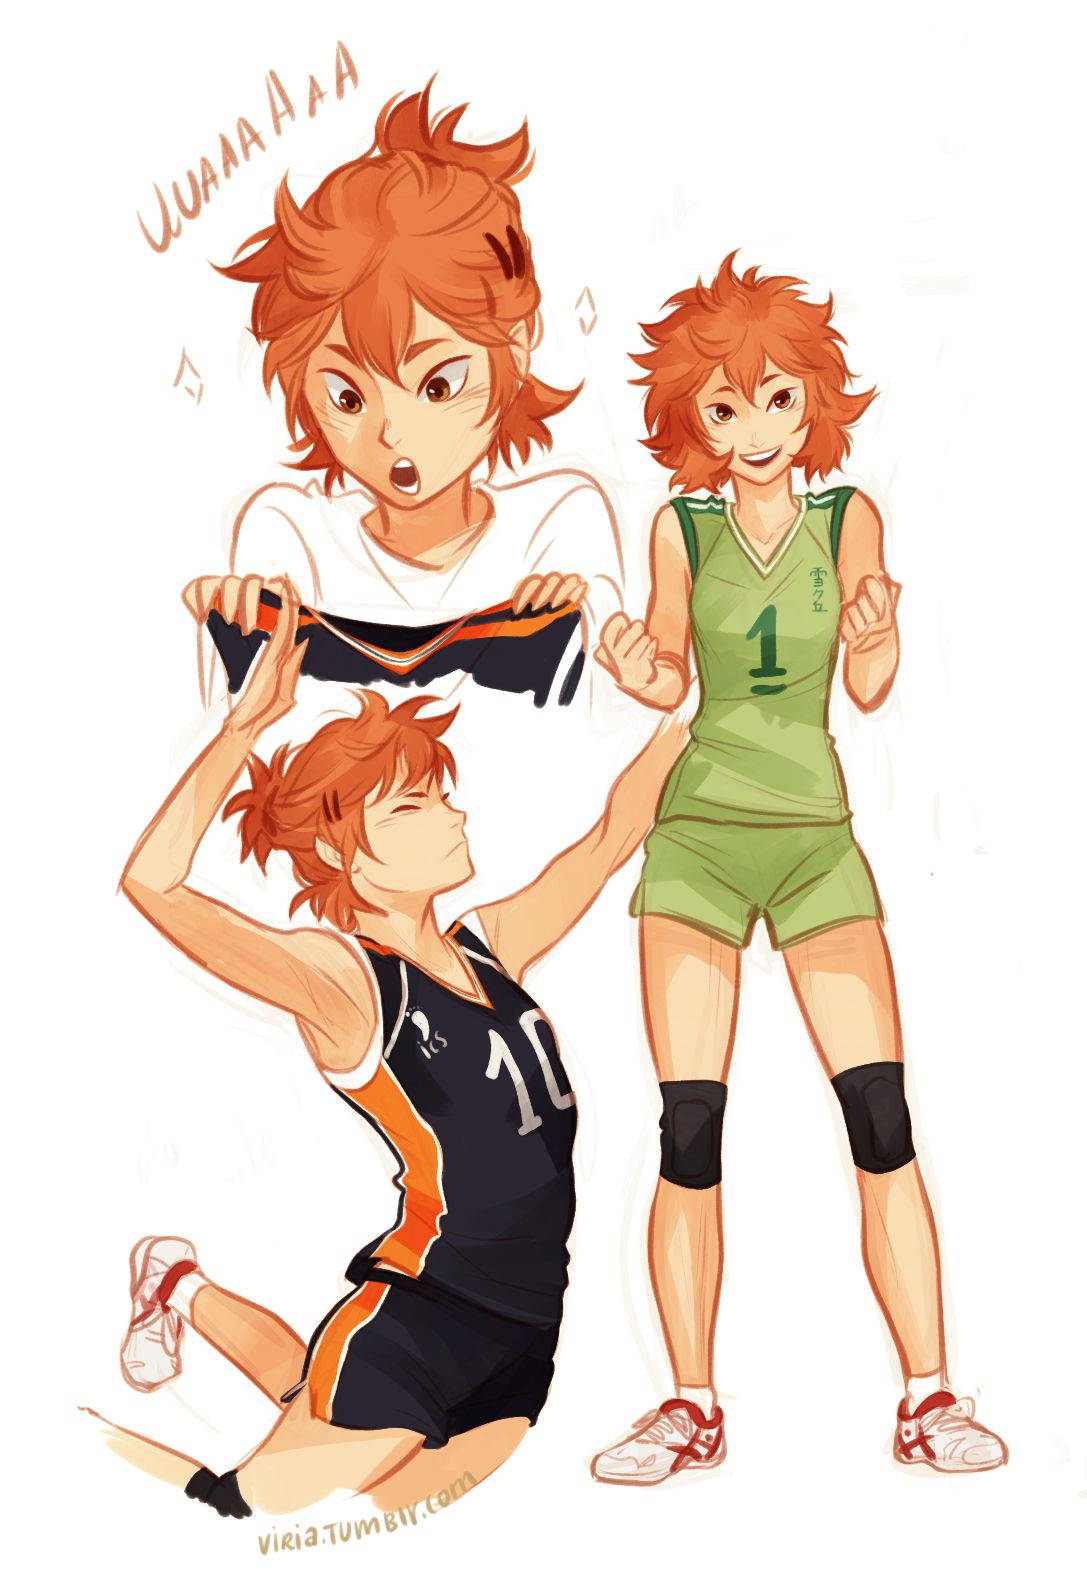 The Passionate And Ambitious Hinata Shouyou Strives To Achieve His Dream Of Becoming The Greatest Volleyball Player In The World. Background